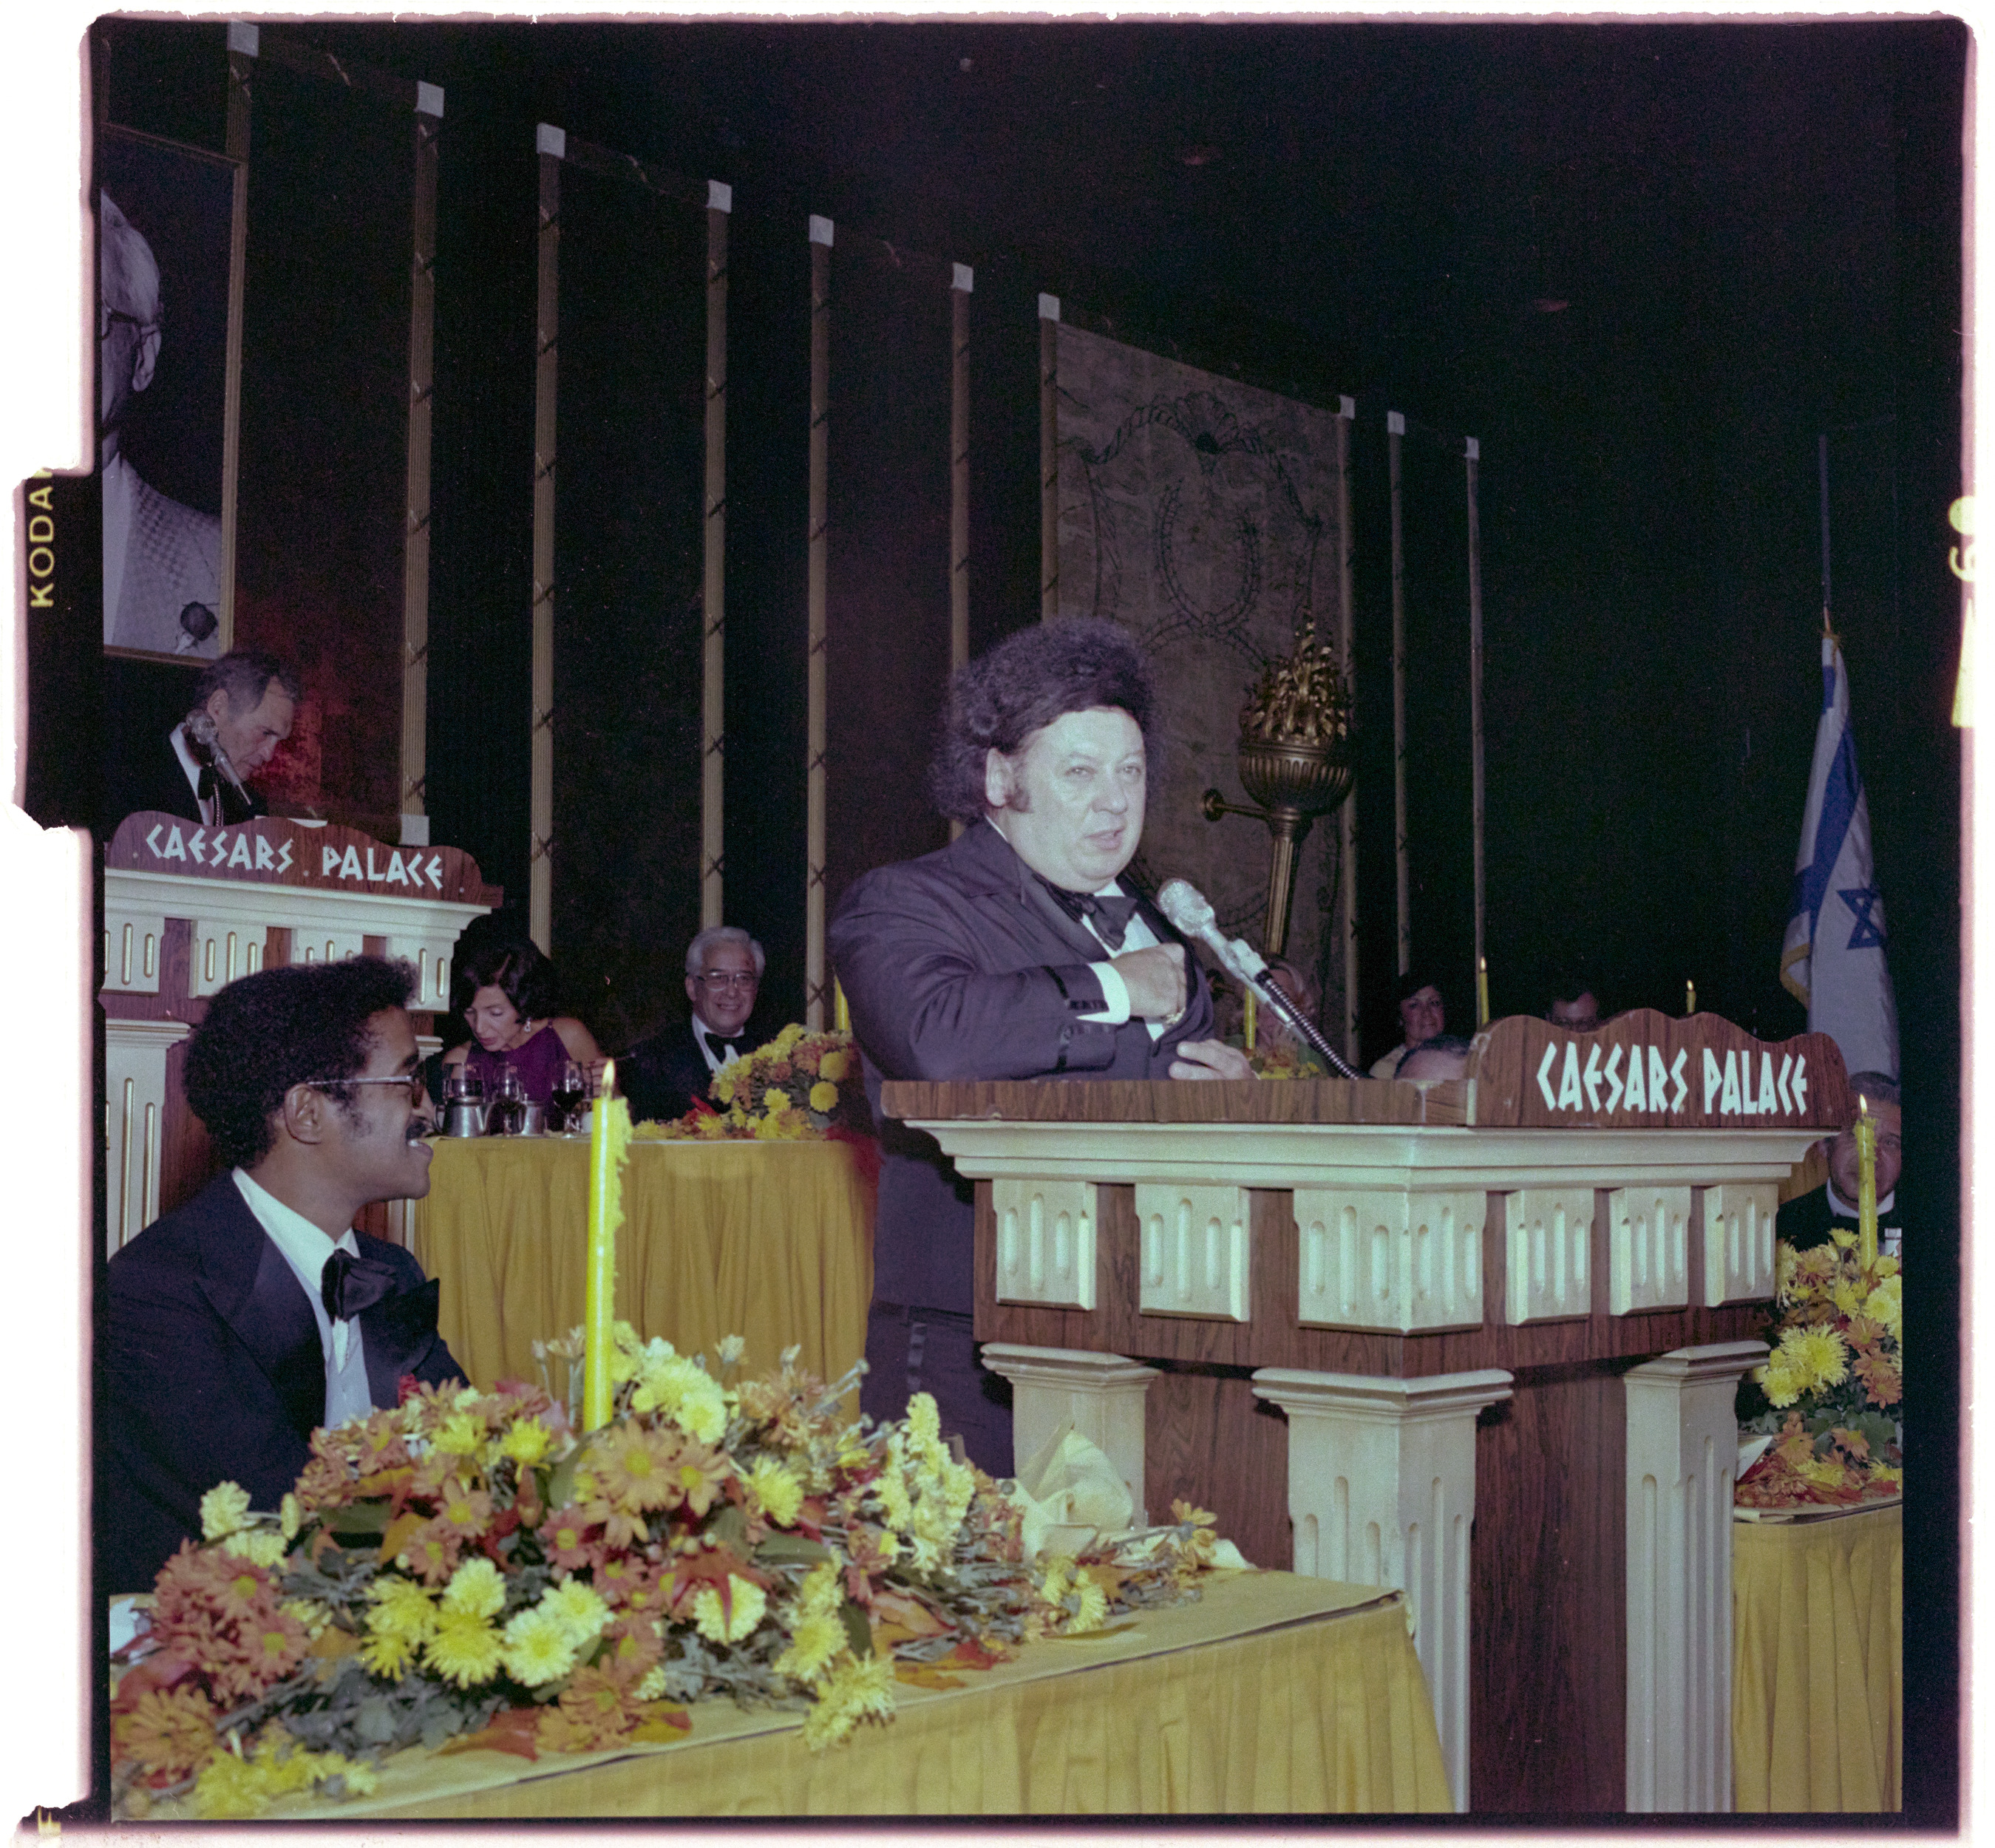 Photographs of Combined Jewish Appeal (Israel Bonds Dinner), image 17